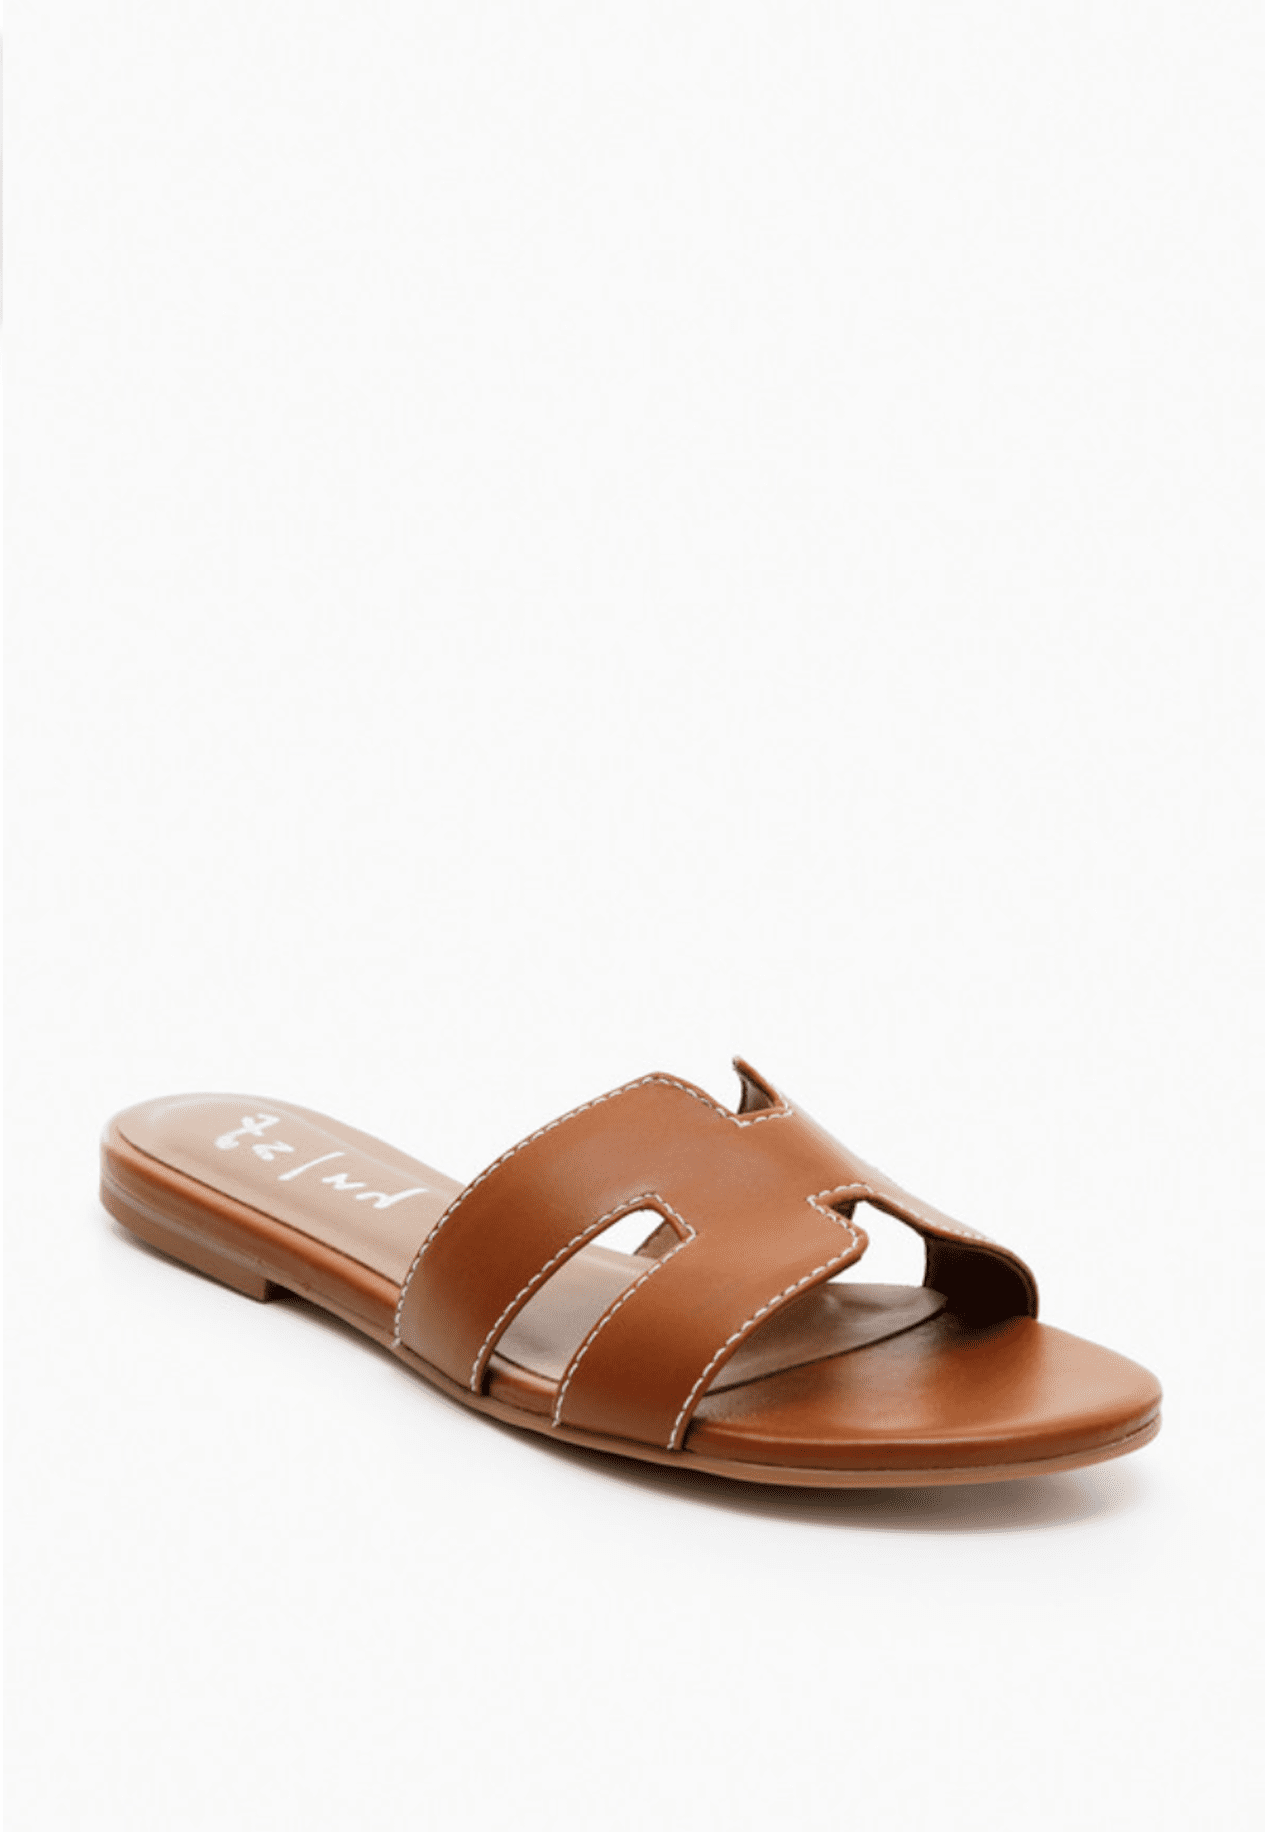 image of a brown leather sandal with an H cut-out shape on the top